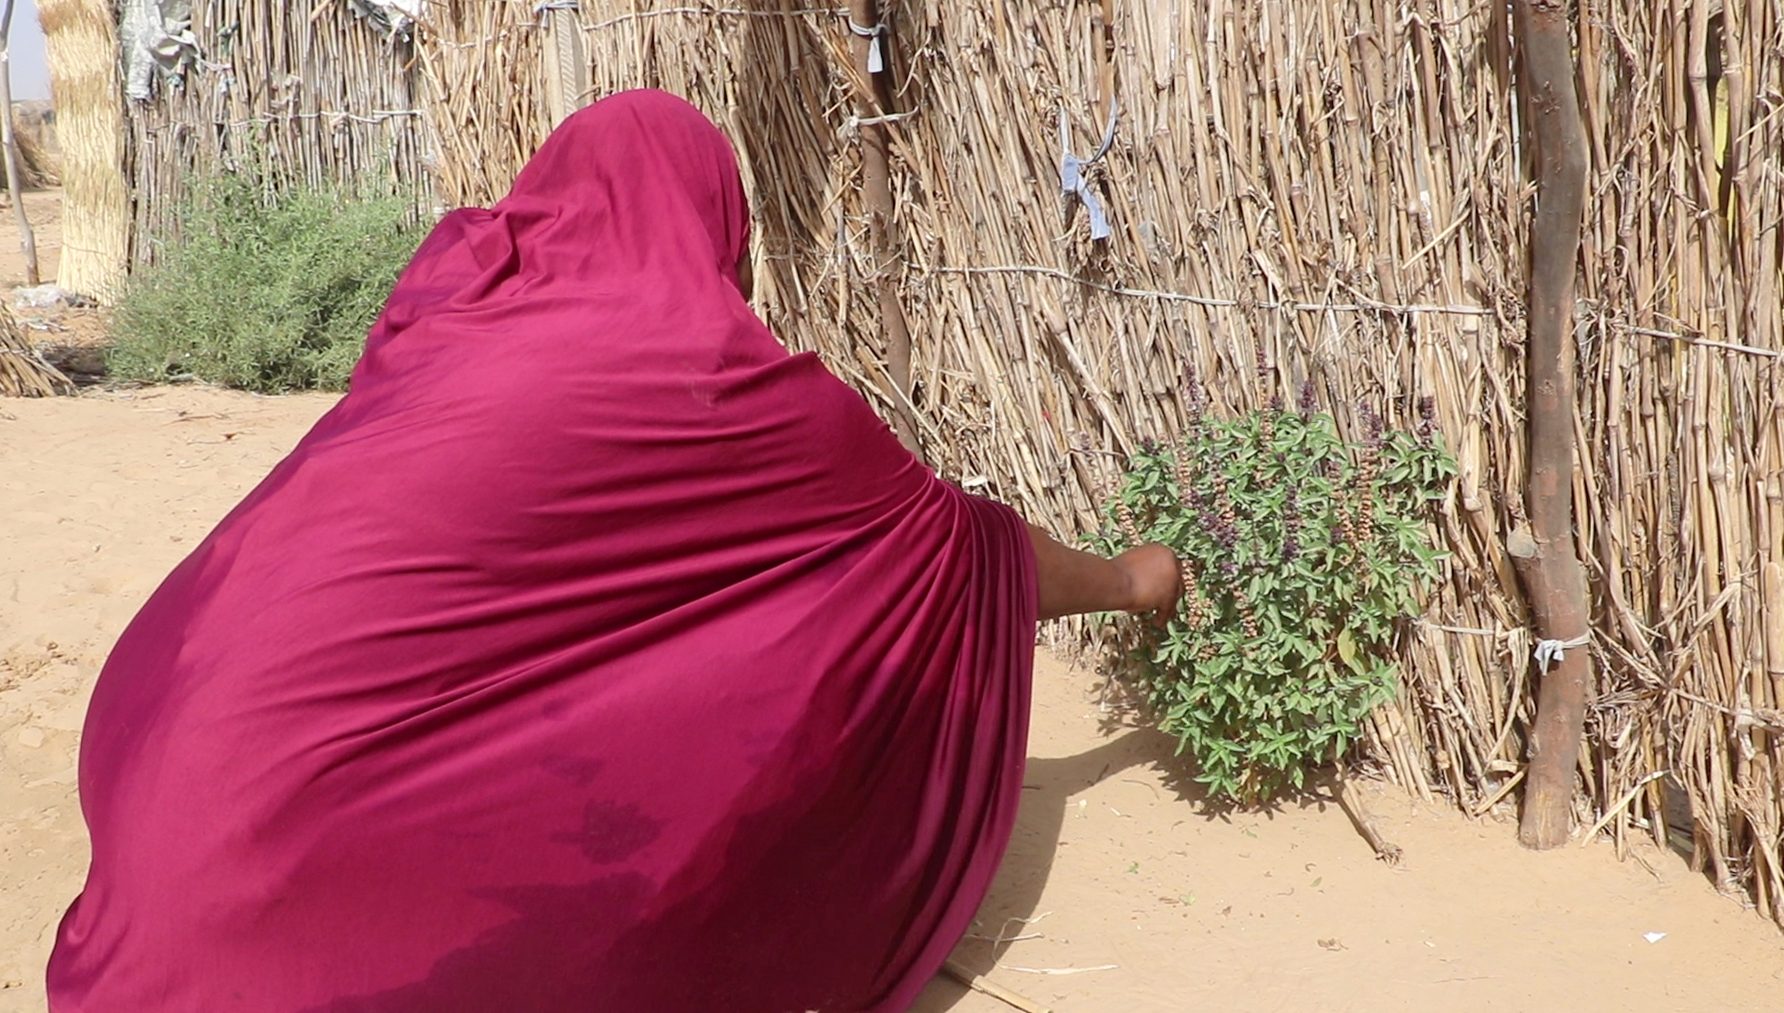 Yakoura, now 20, takes care of a plant in her yard in Niger's Diffa region.